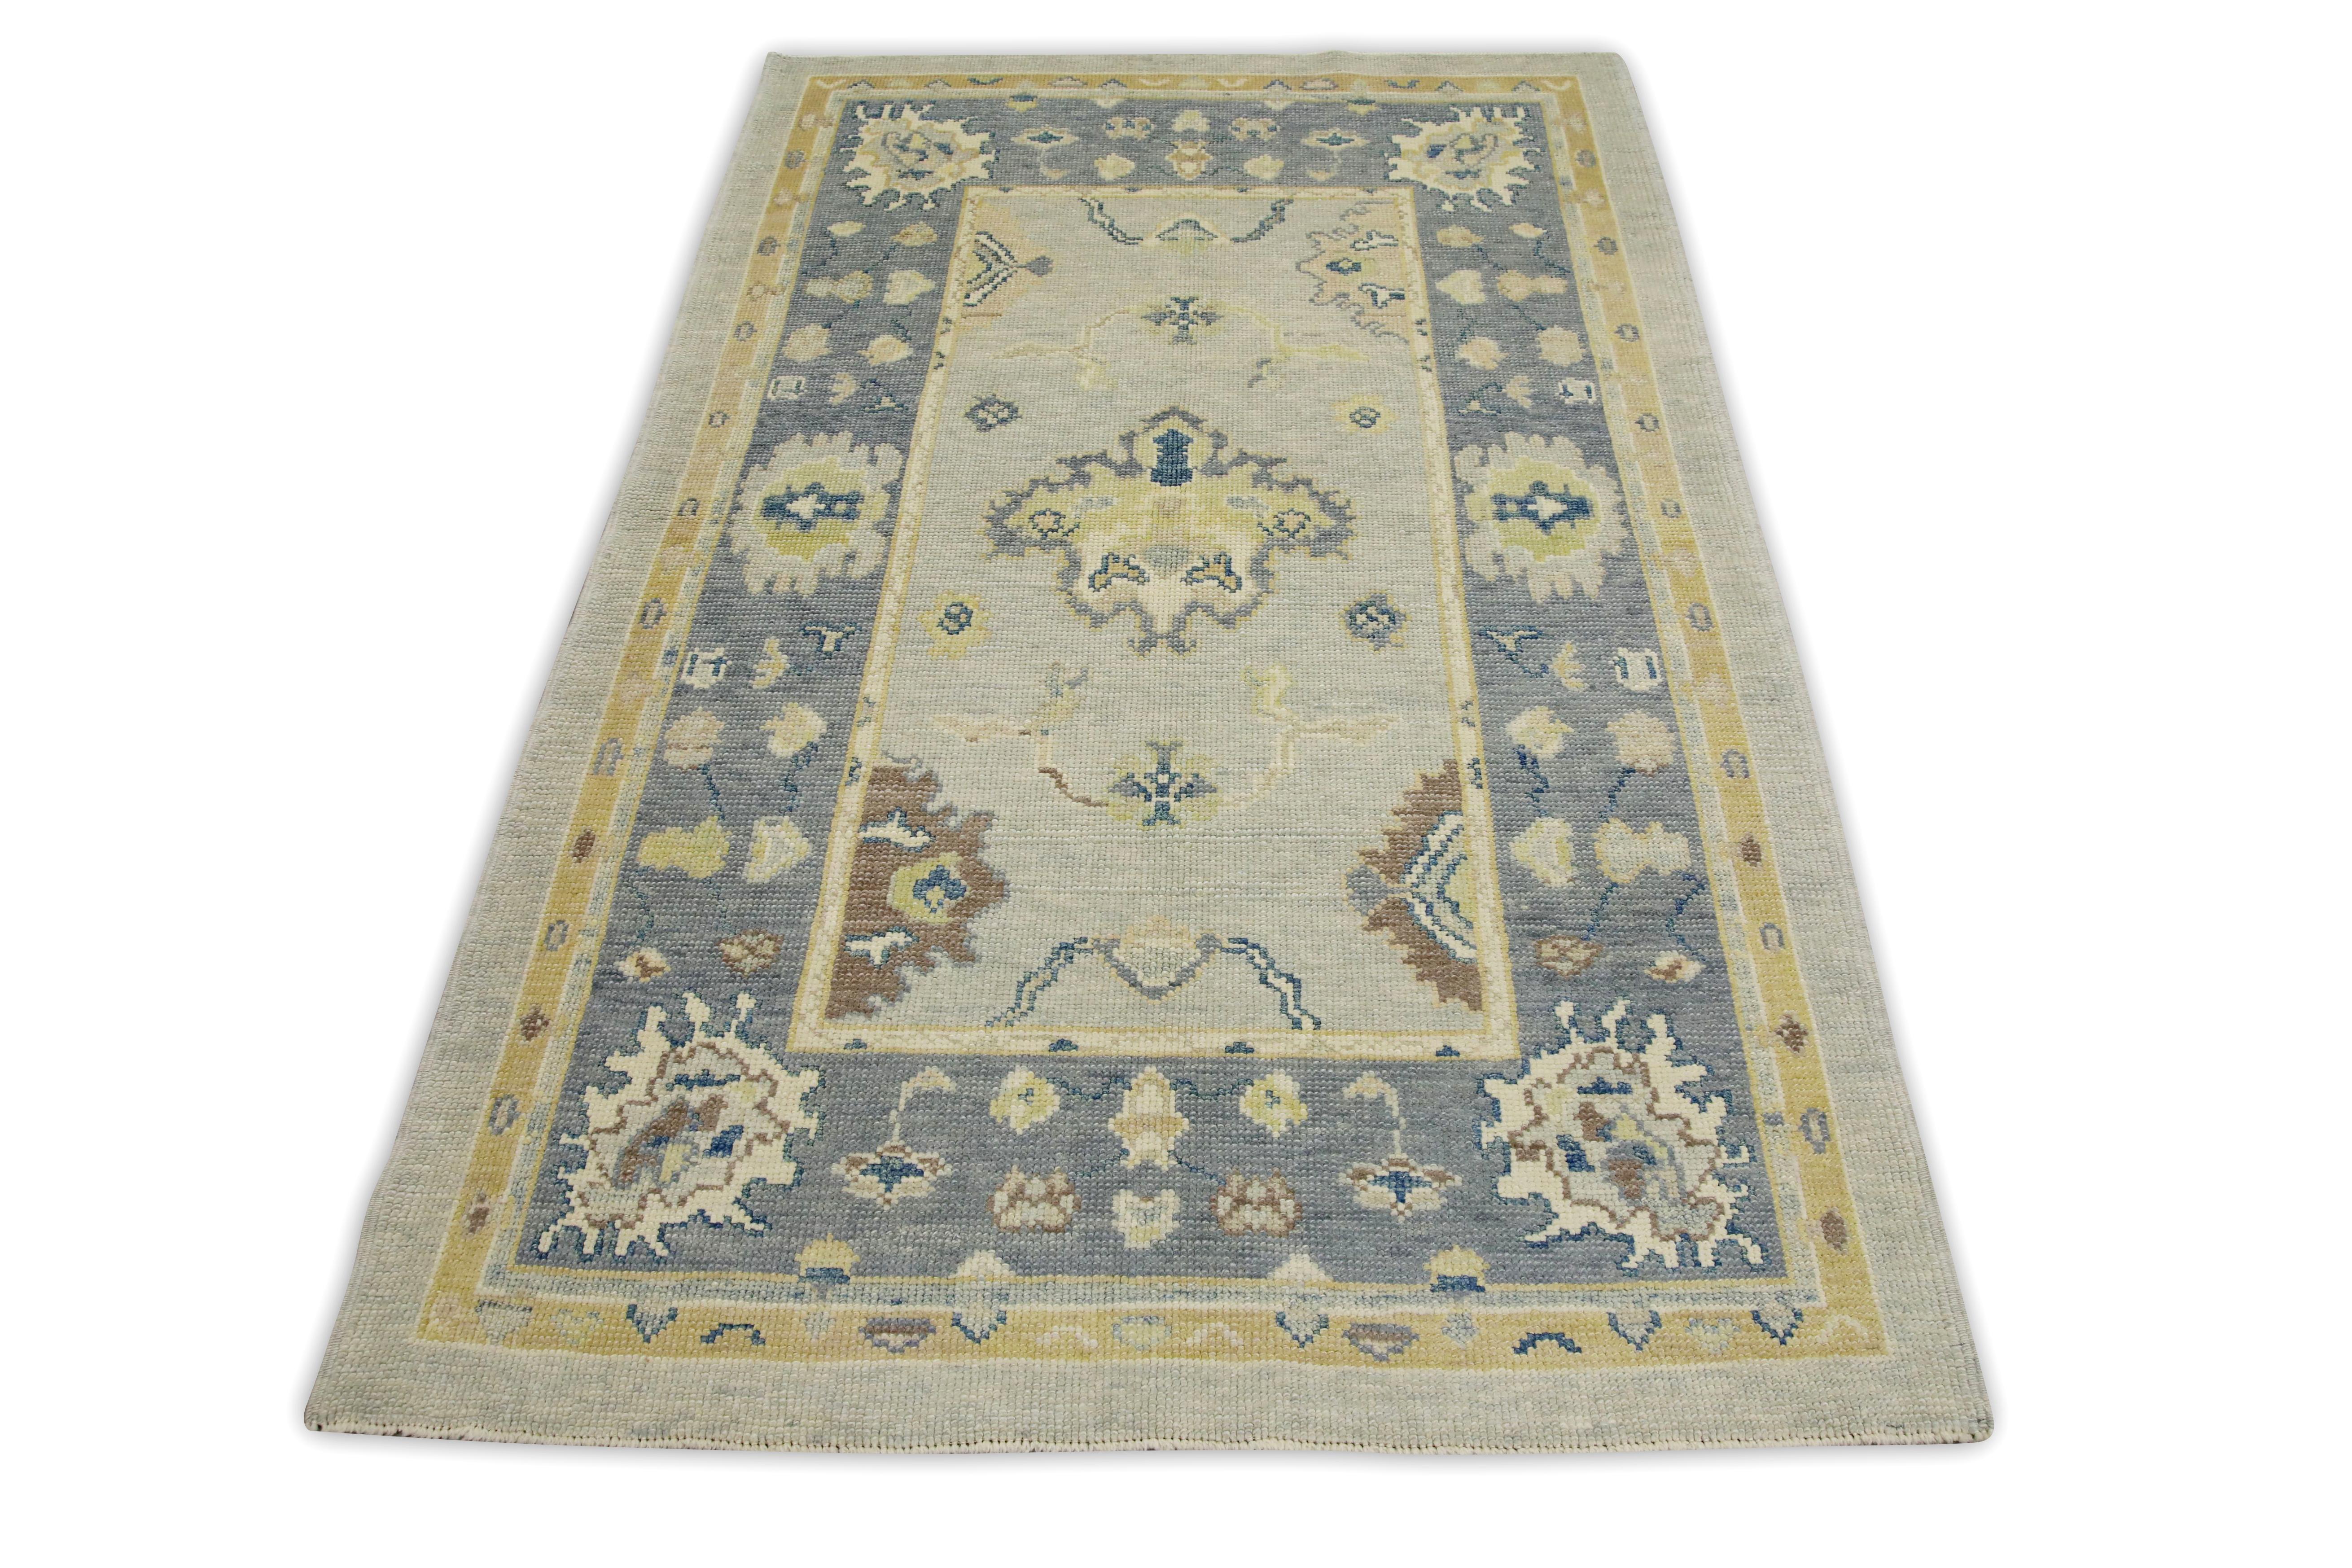 Contemporary Blue Floral Design Handwoven Wool Turkish Oushak Rug 4' x 6'1